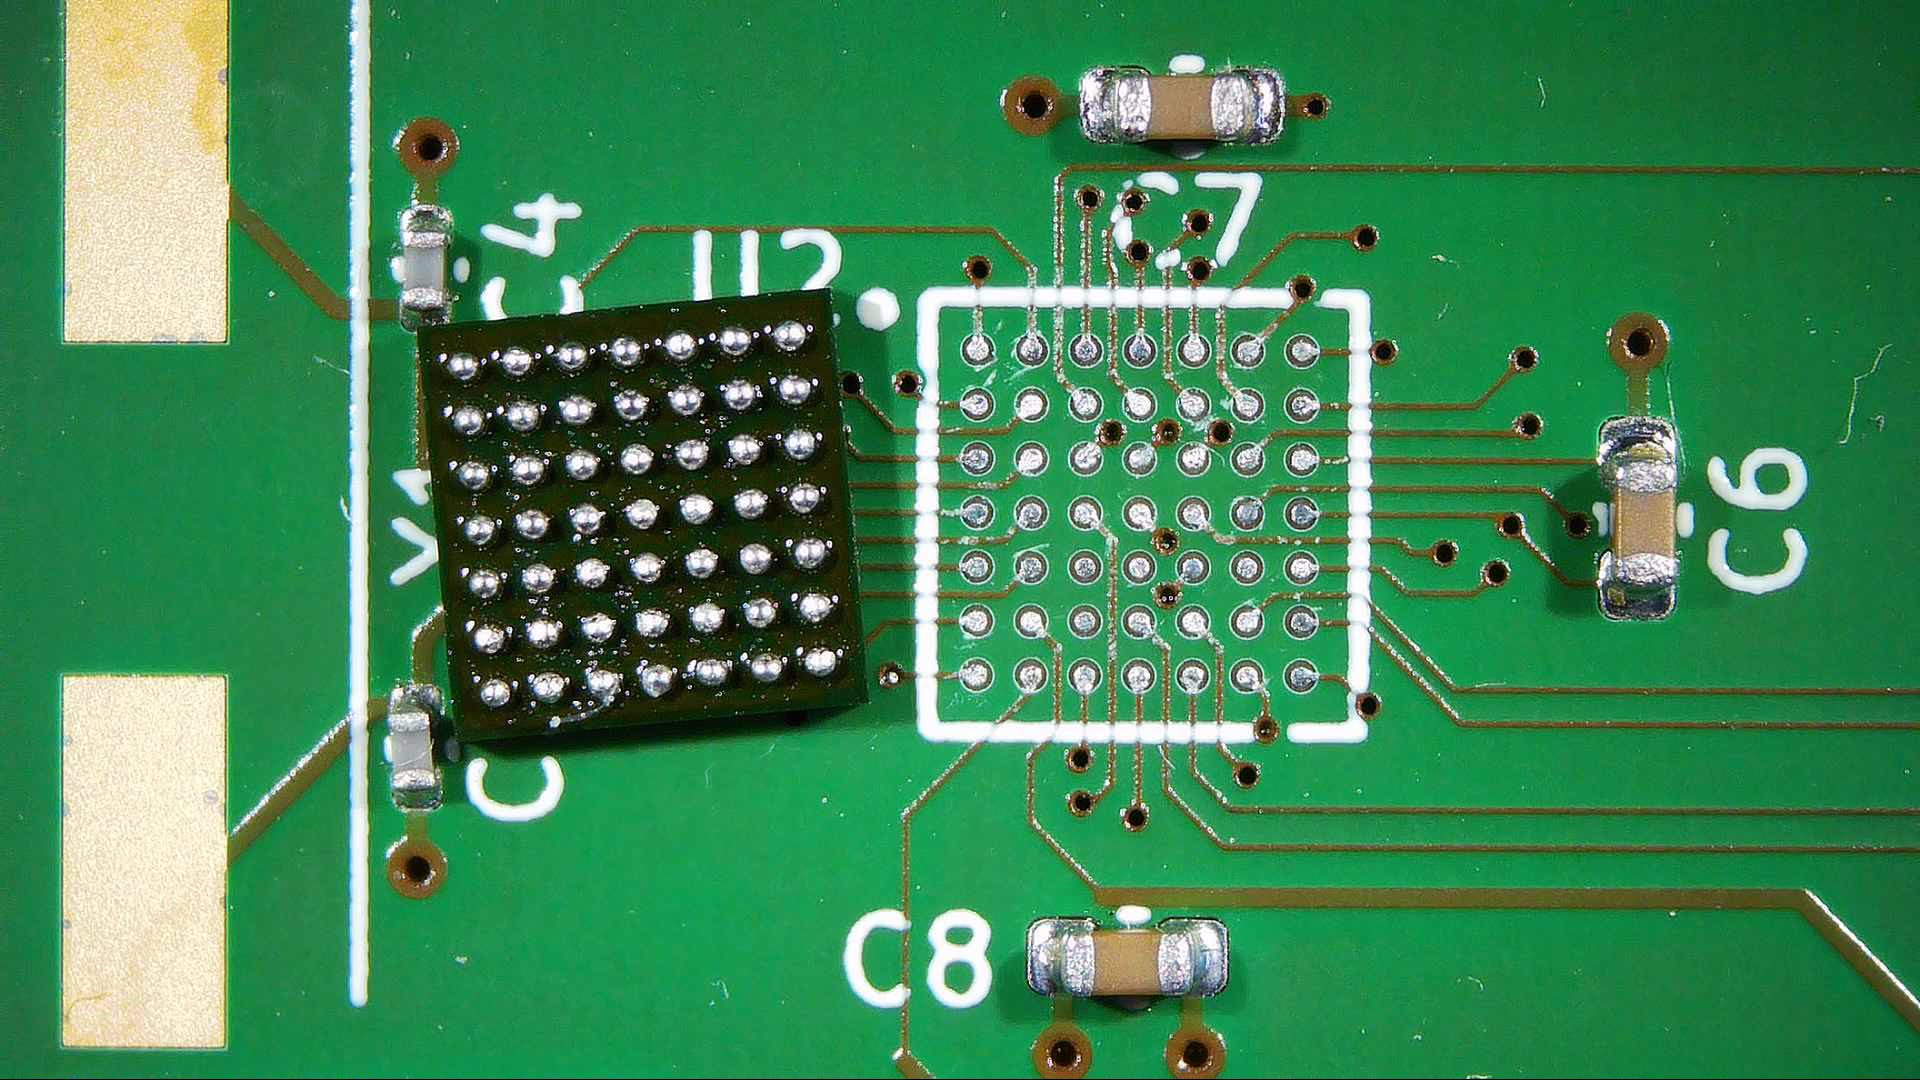 In our previous article on Ball Grid Arrays (BGAs), we explored how to design circuit boards and how to route the signals coming out of a BGA package.